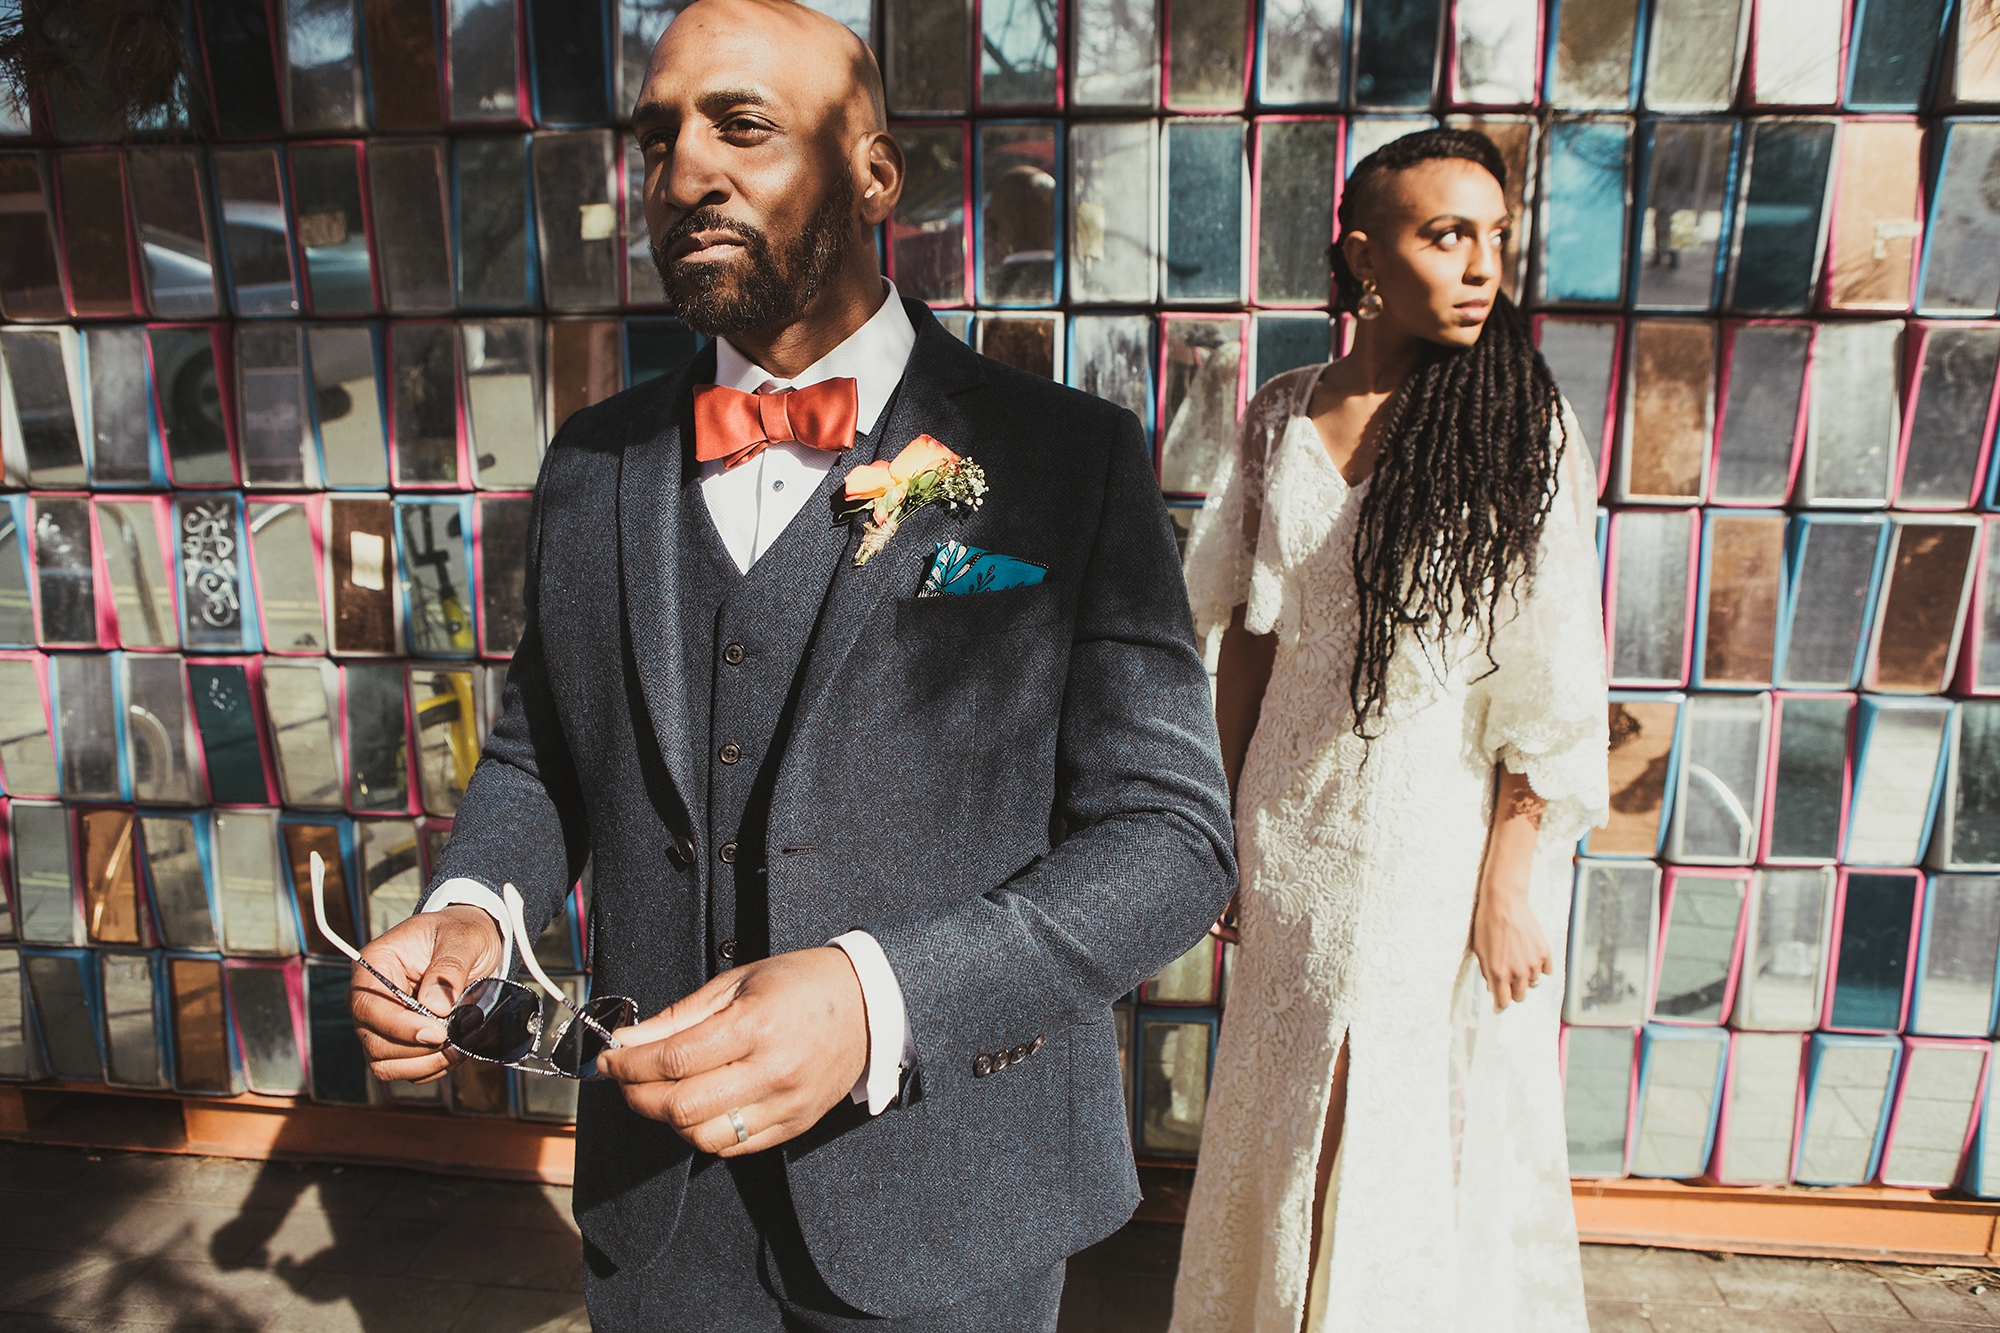 28 A tropical and bohemian inspired cool urban wedding